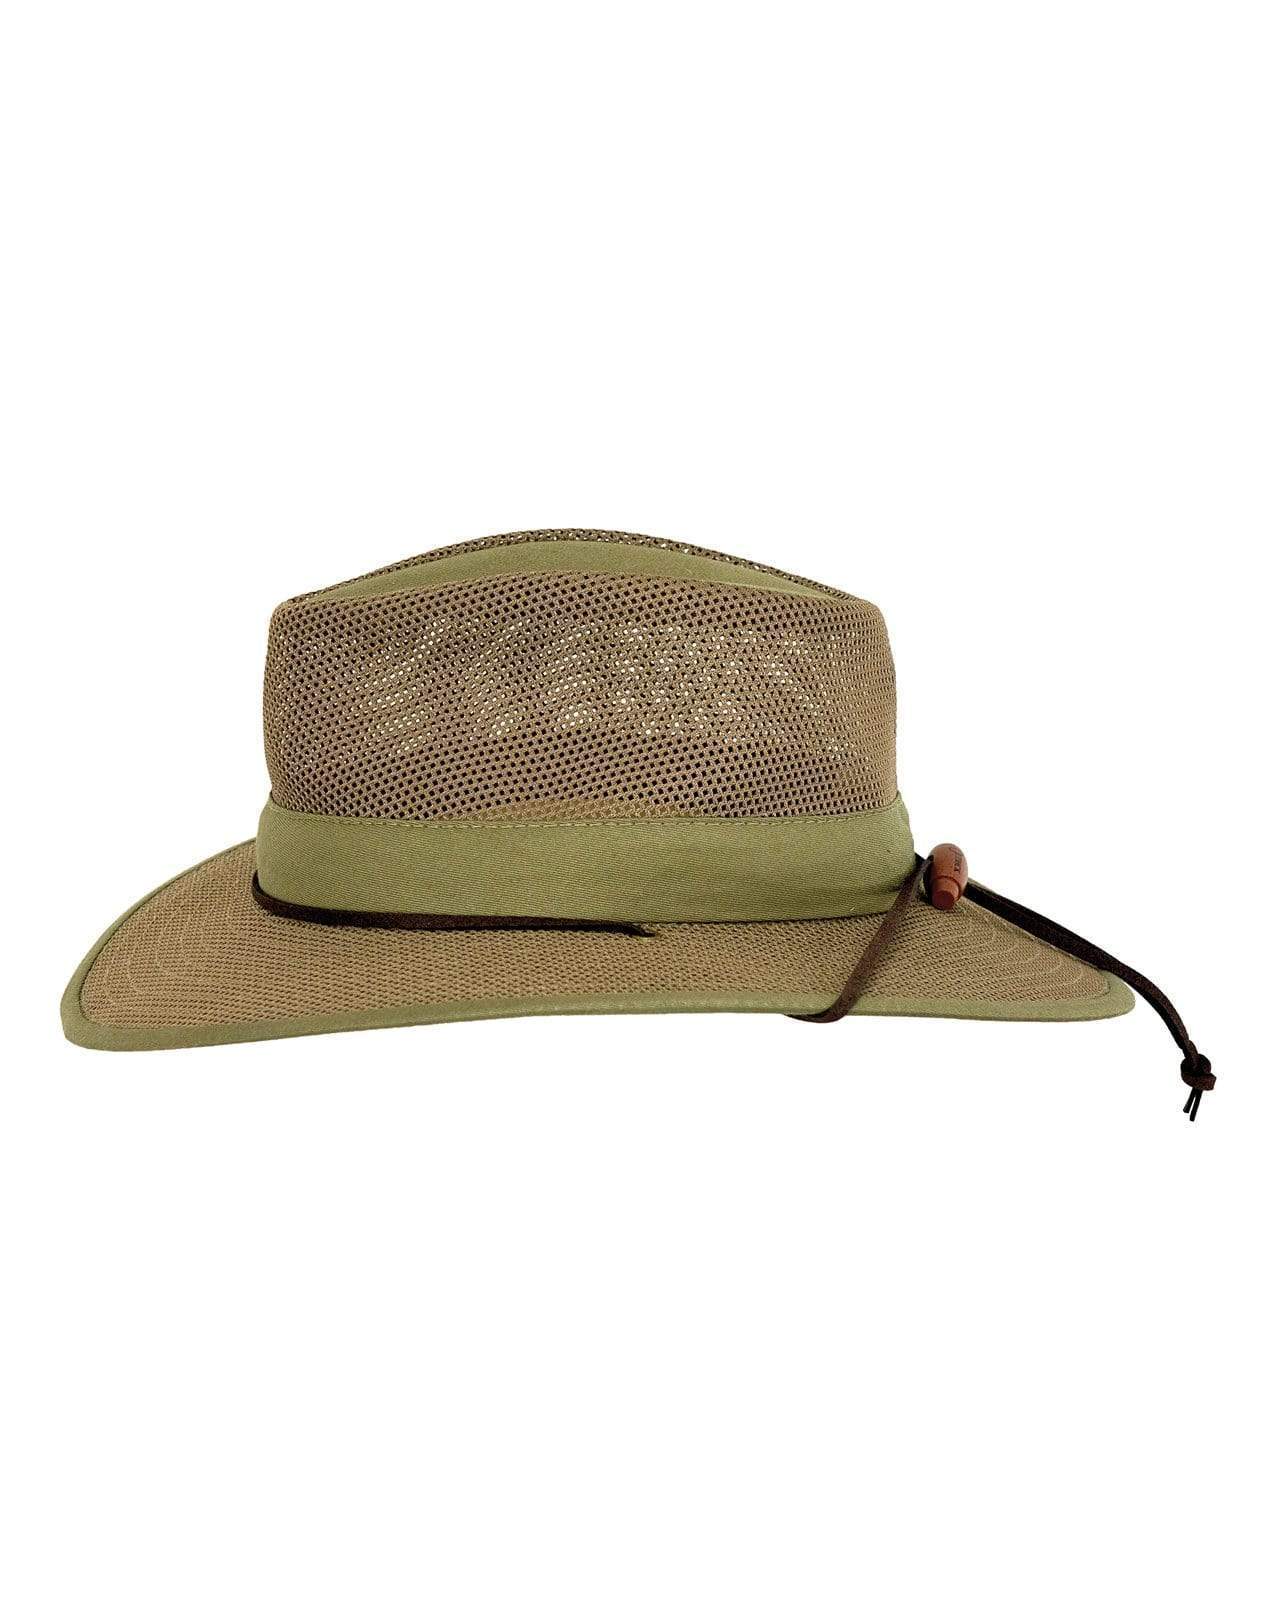 Outback Trading Company Stirling Creek Hats